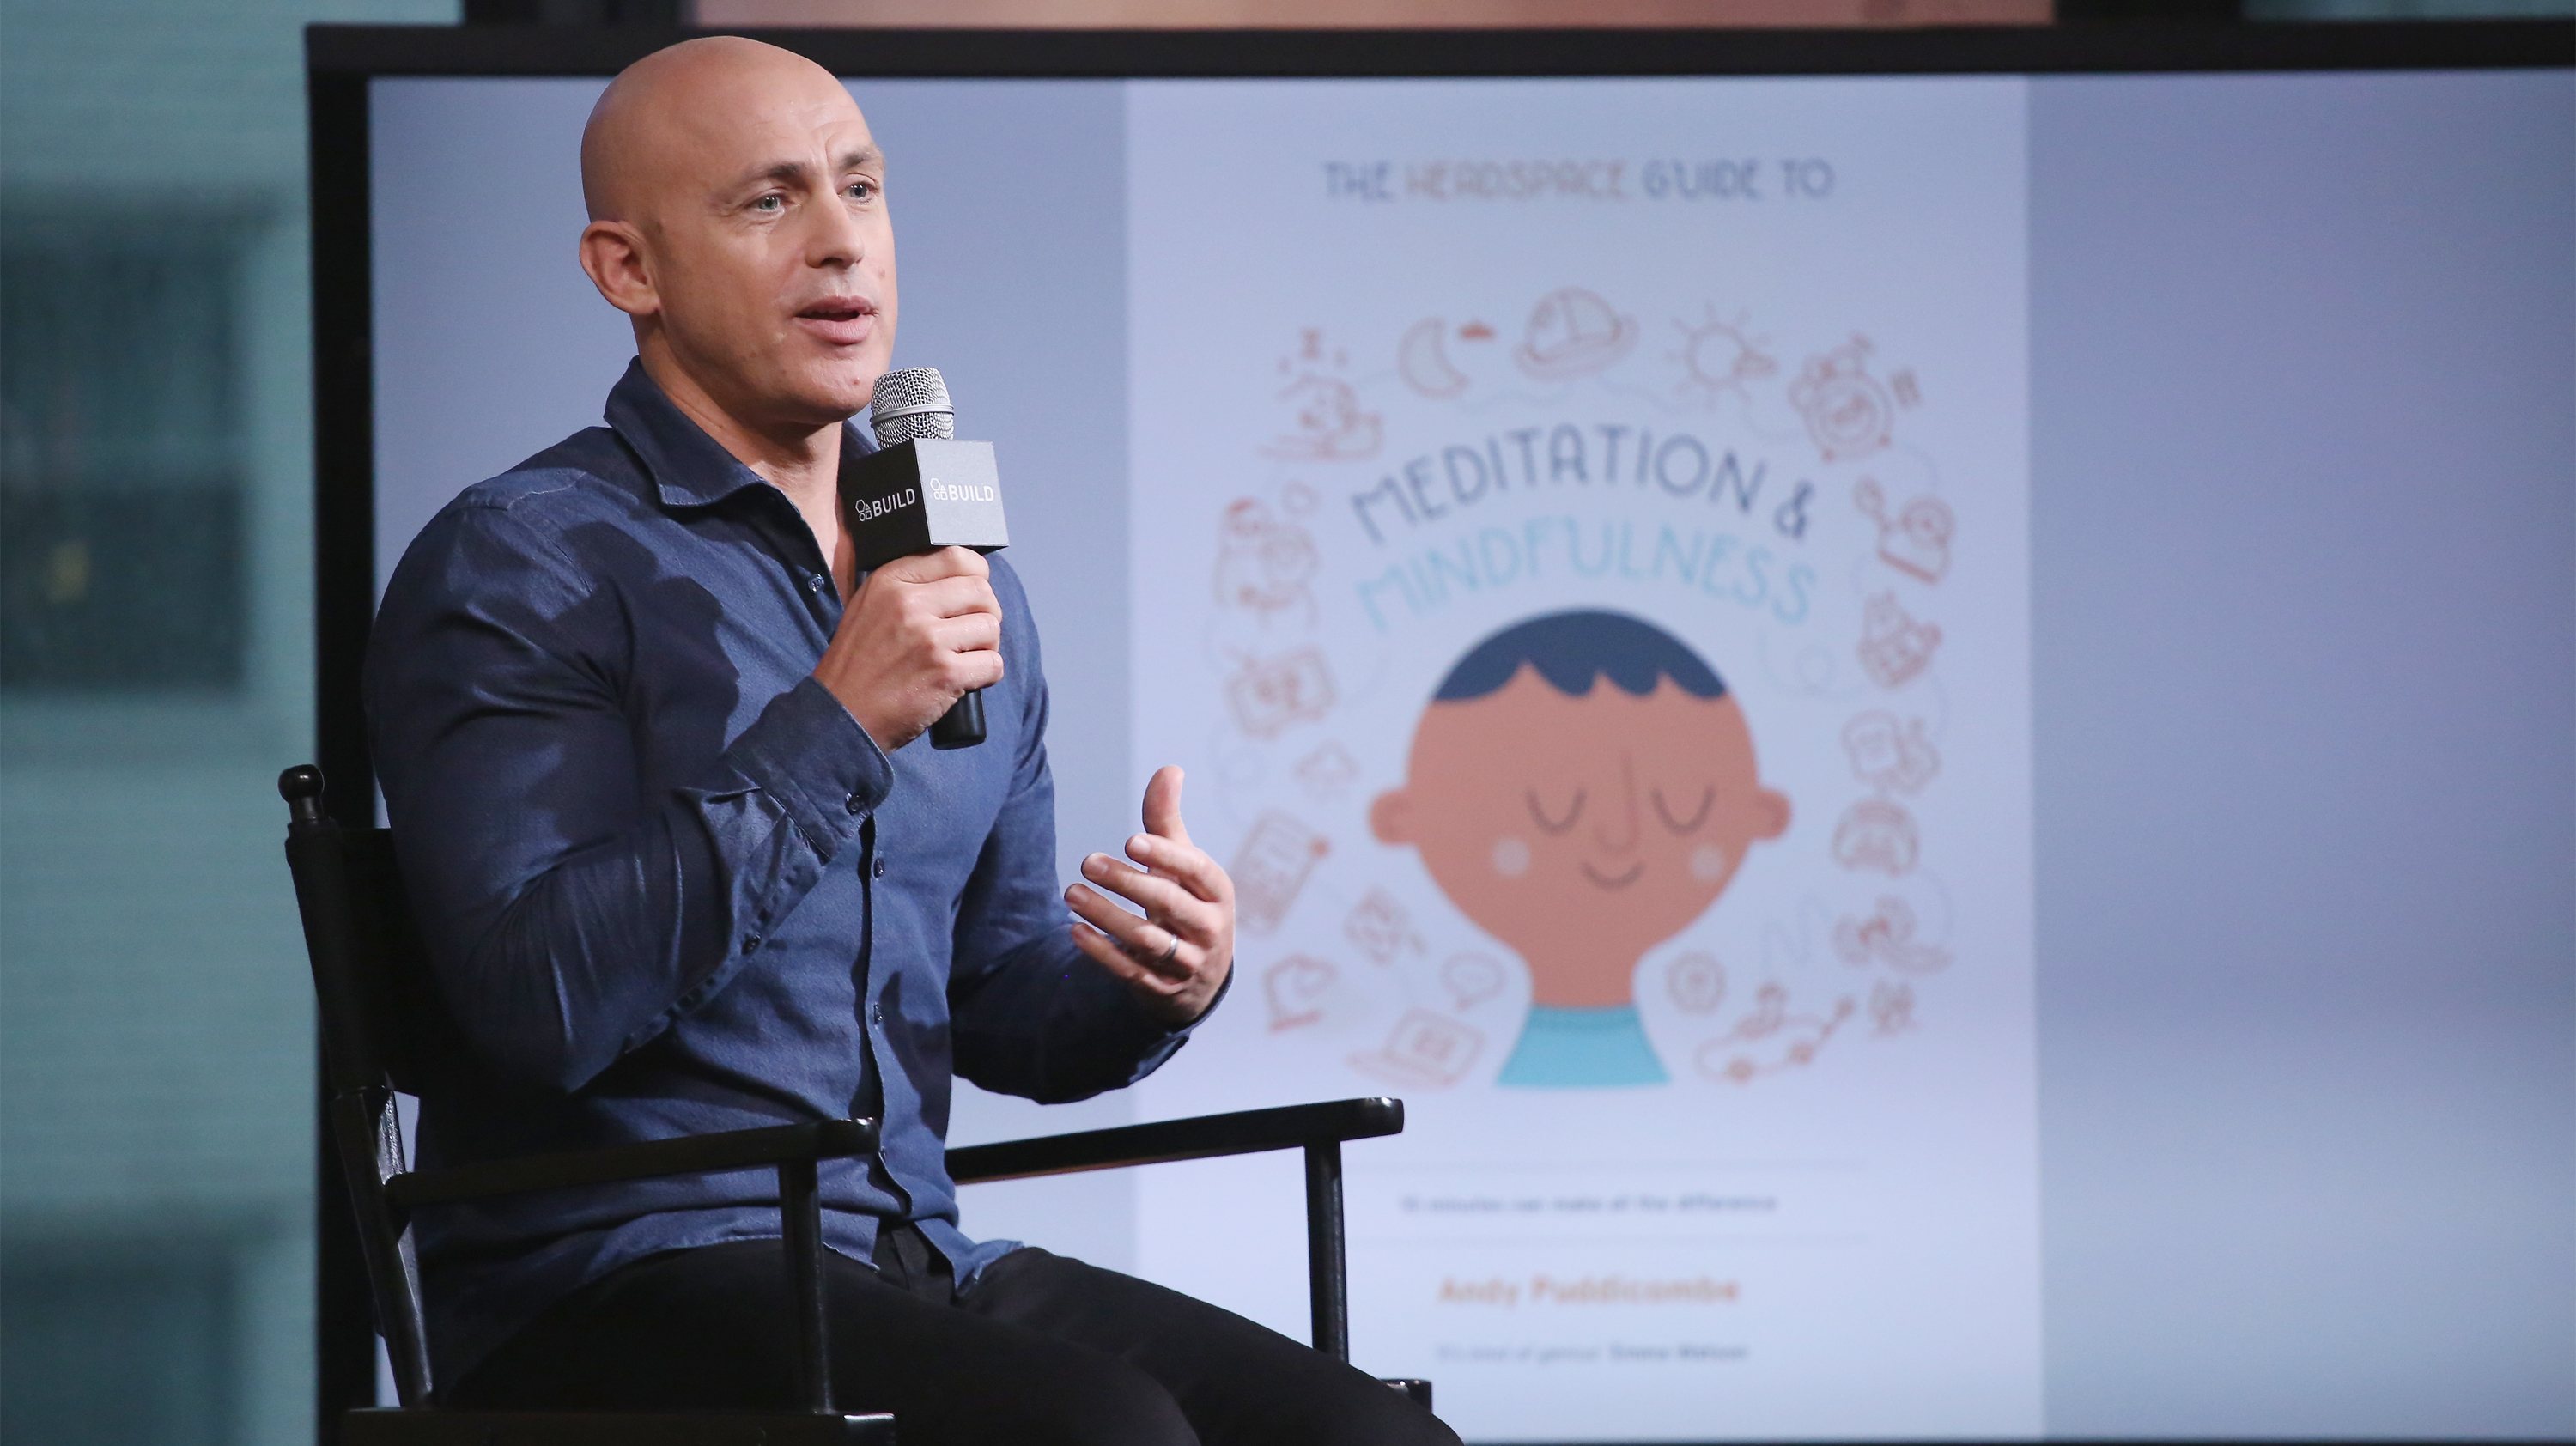 The BUILD Series Presents Meditation Expert Andy Puddicombe Discussing His Book &quot;The Headspace Guide to Meditation &amp;amp; Mindfulness&quot;